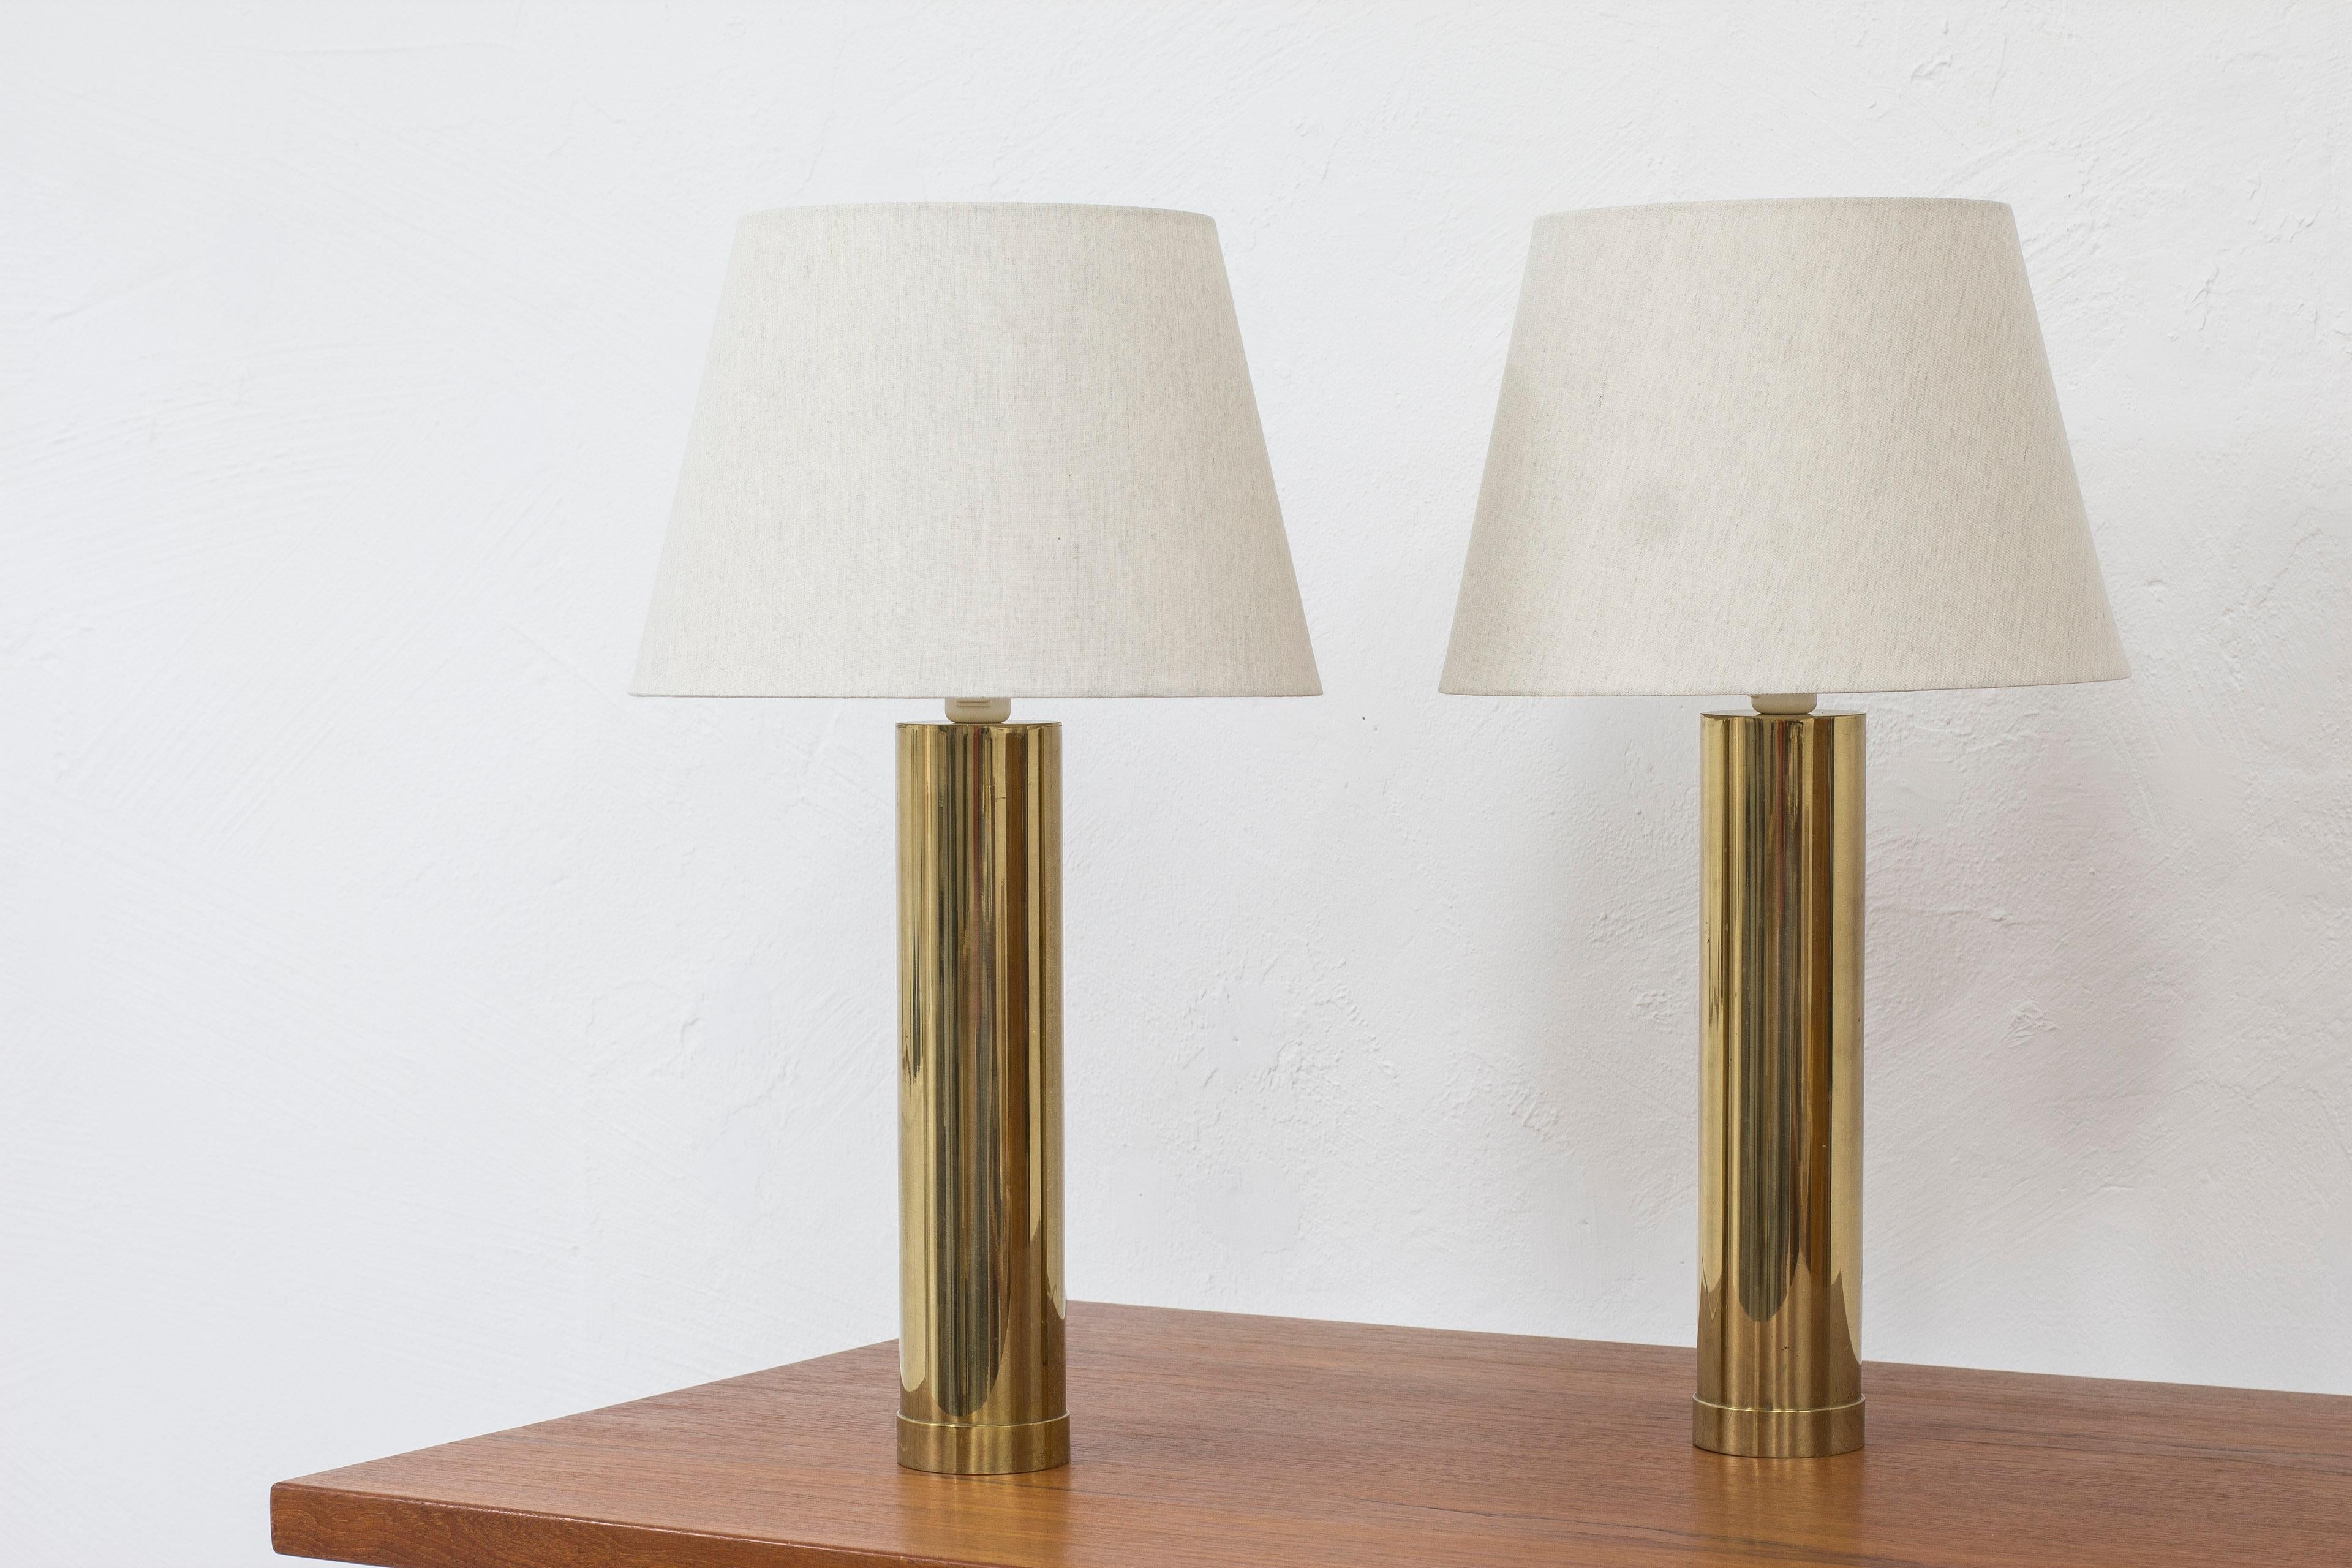 Pair of table lamps produced in Sweden by Bergboms. Made during the 1960s. Solid brass with linen lamp shade in light greige. Lamp holder with light switch. Very good vintage condition with few signs of age related wear and patina.

Two pairs